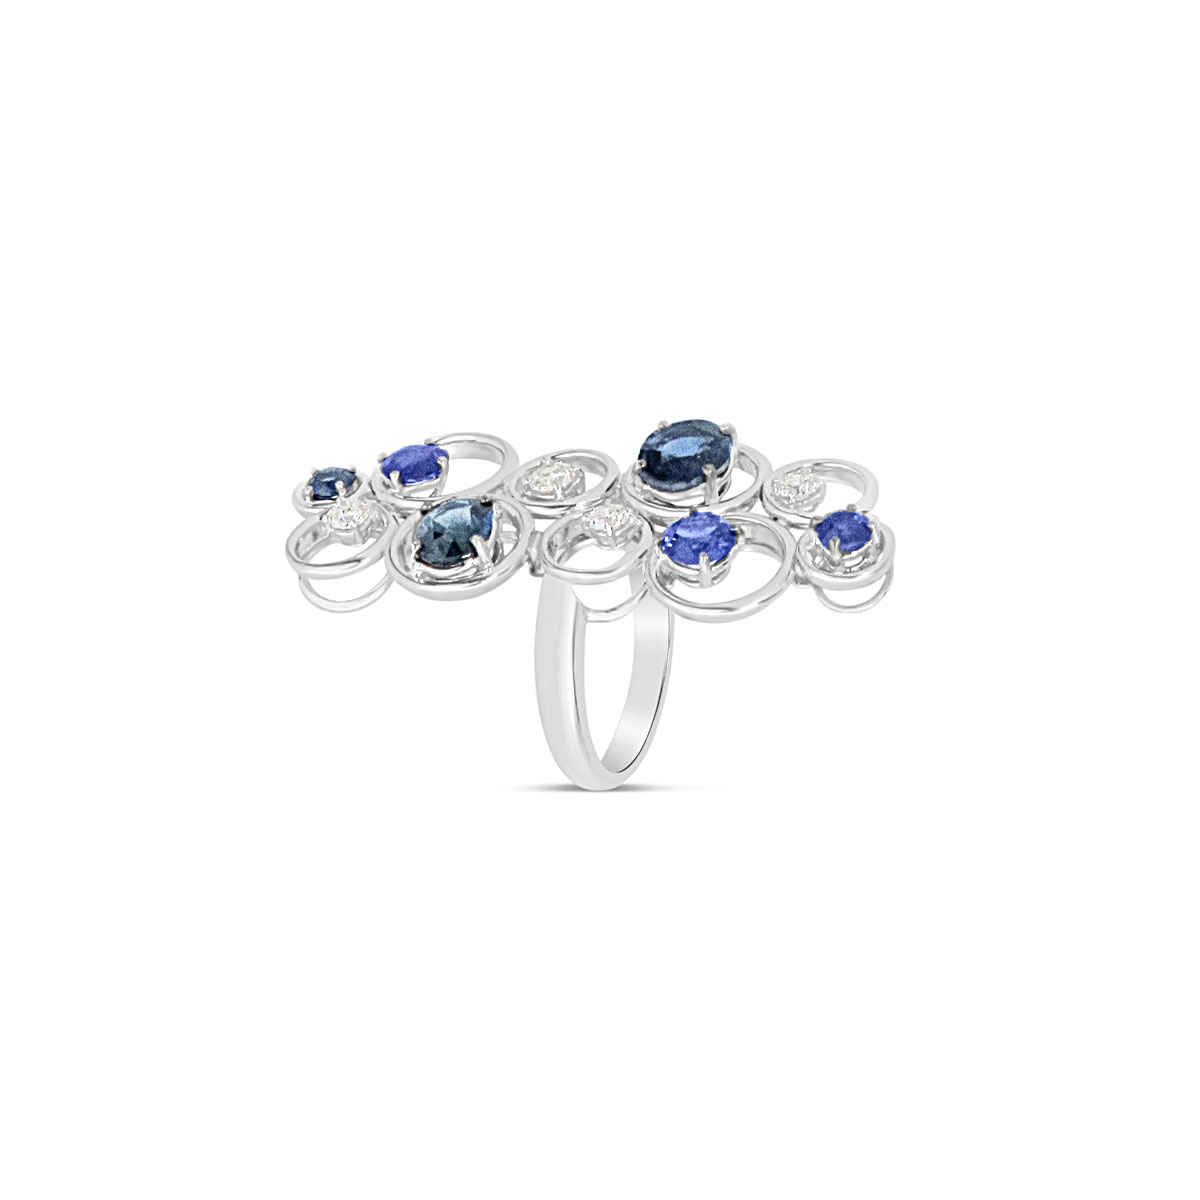 Circle Ring with Diamond and Blue Sapphire Accents - 